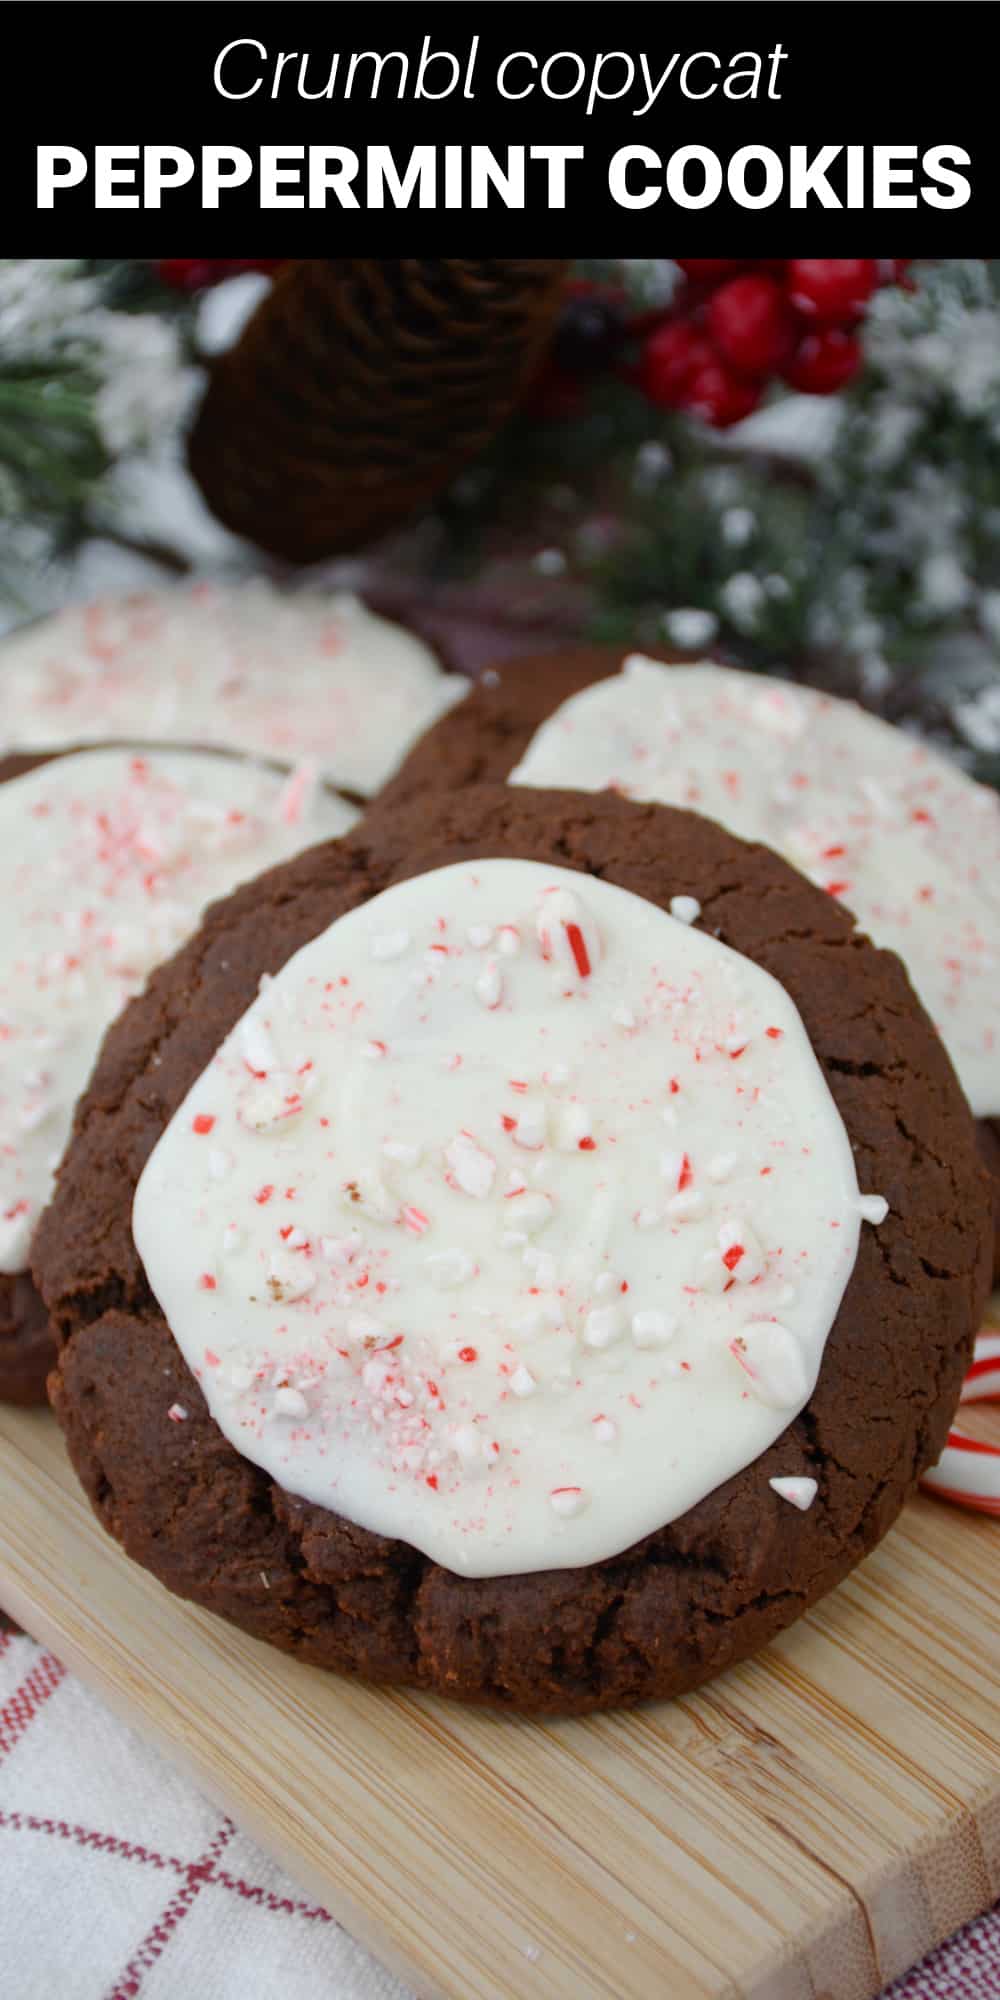 These peppermint bark cookies may just be the perfect holiday treat. From the rich and chewy chocolate cookie to the smooth and creamy peppermint frosting topped with crunchy candy canes, these cookies are bursting with sweet and delicious holiday flavor.